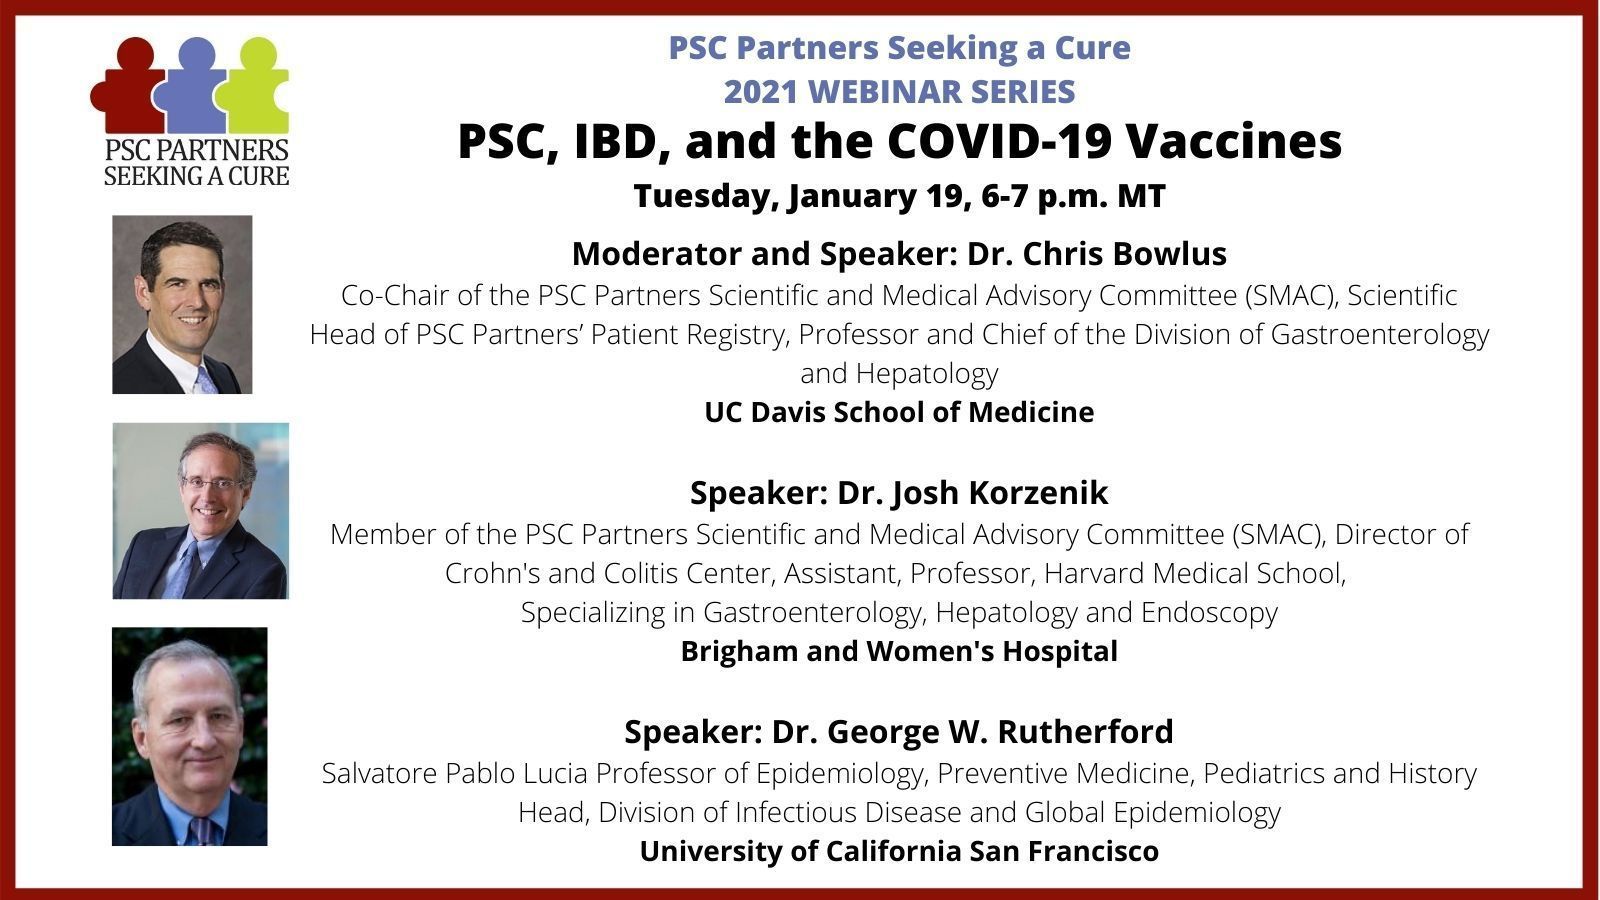 PSC, IBD, and COVID-19 Vaccines